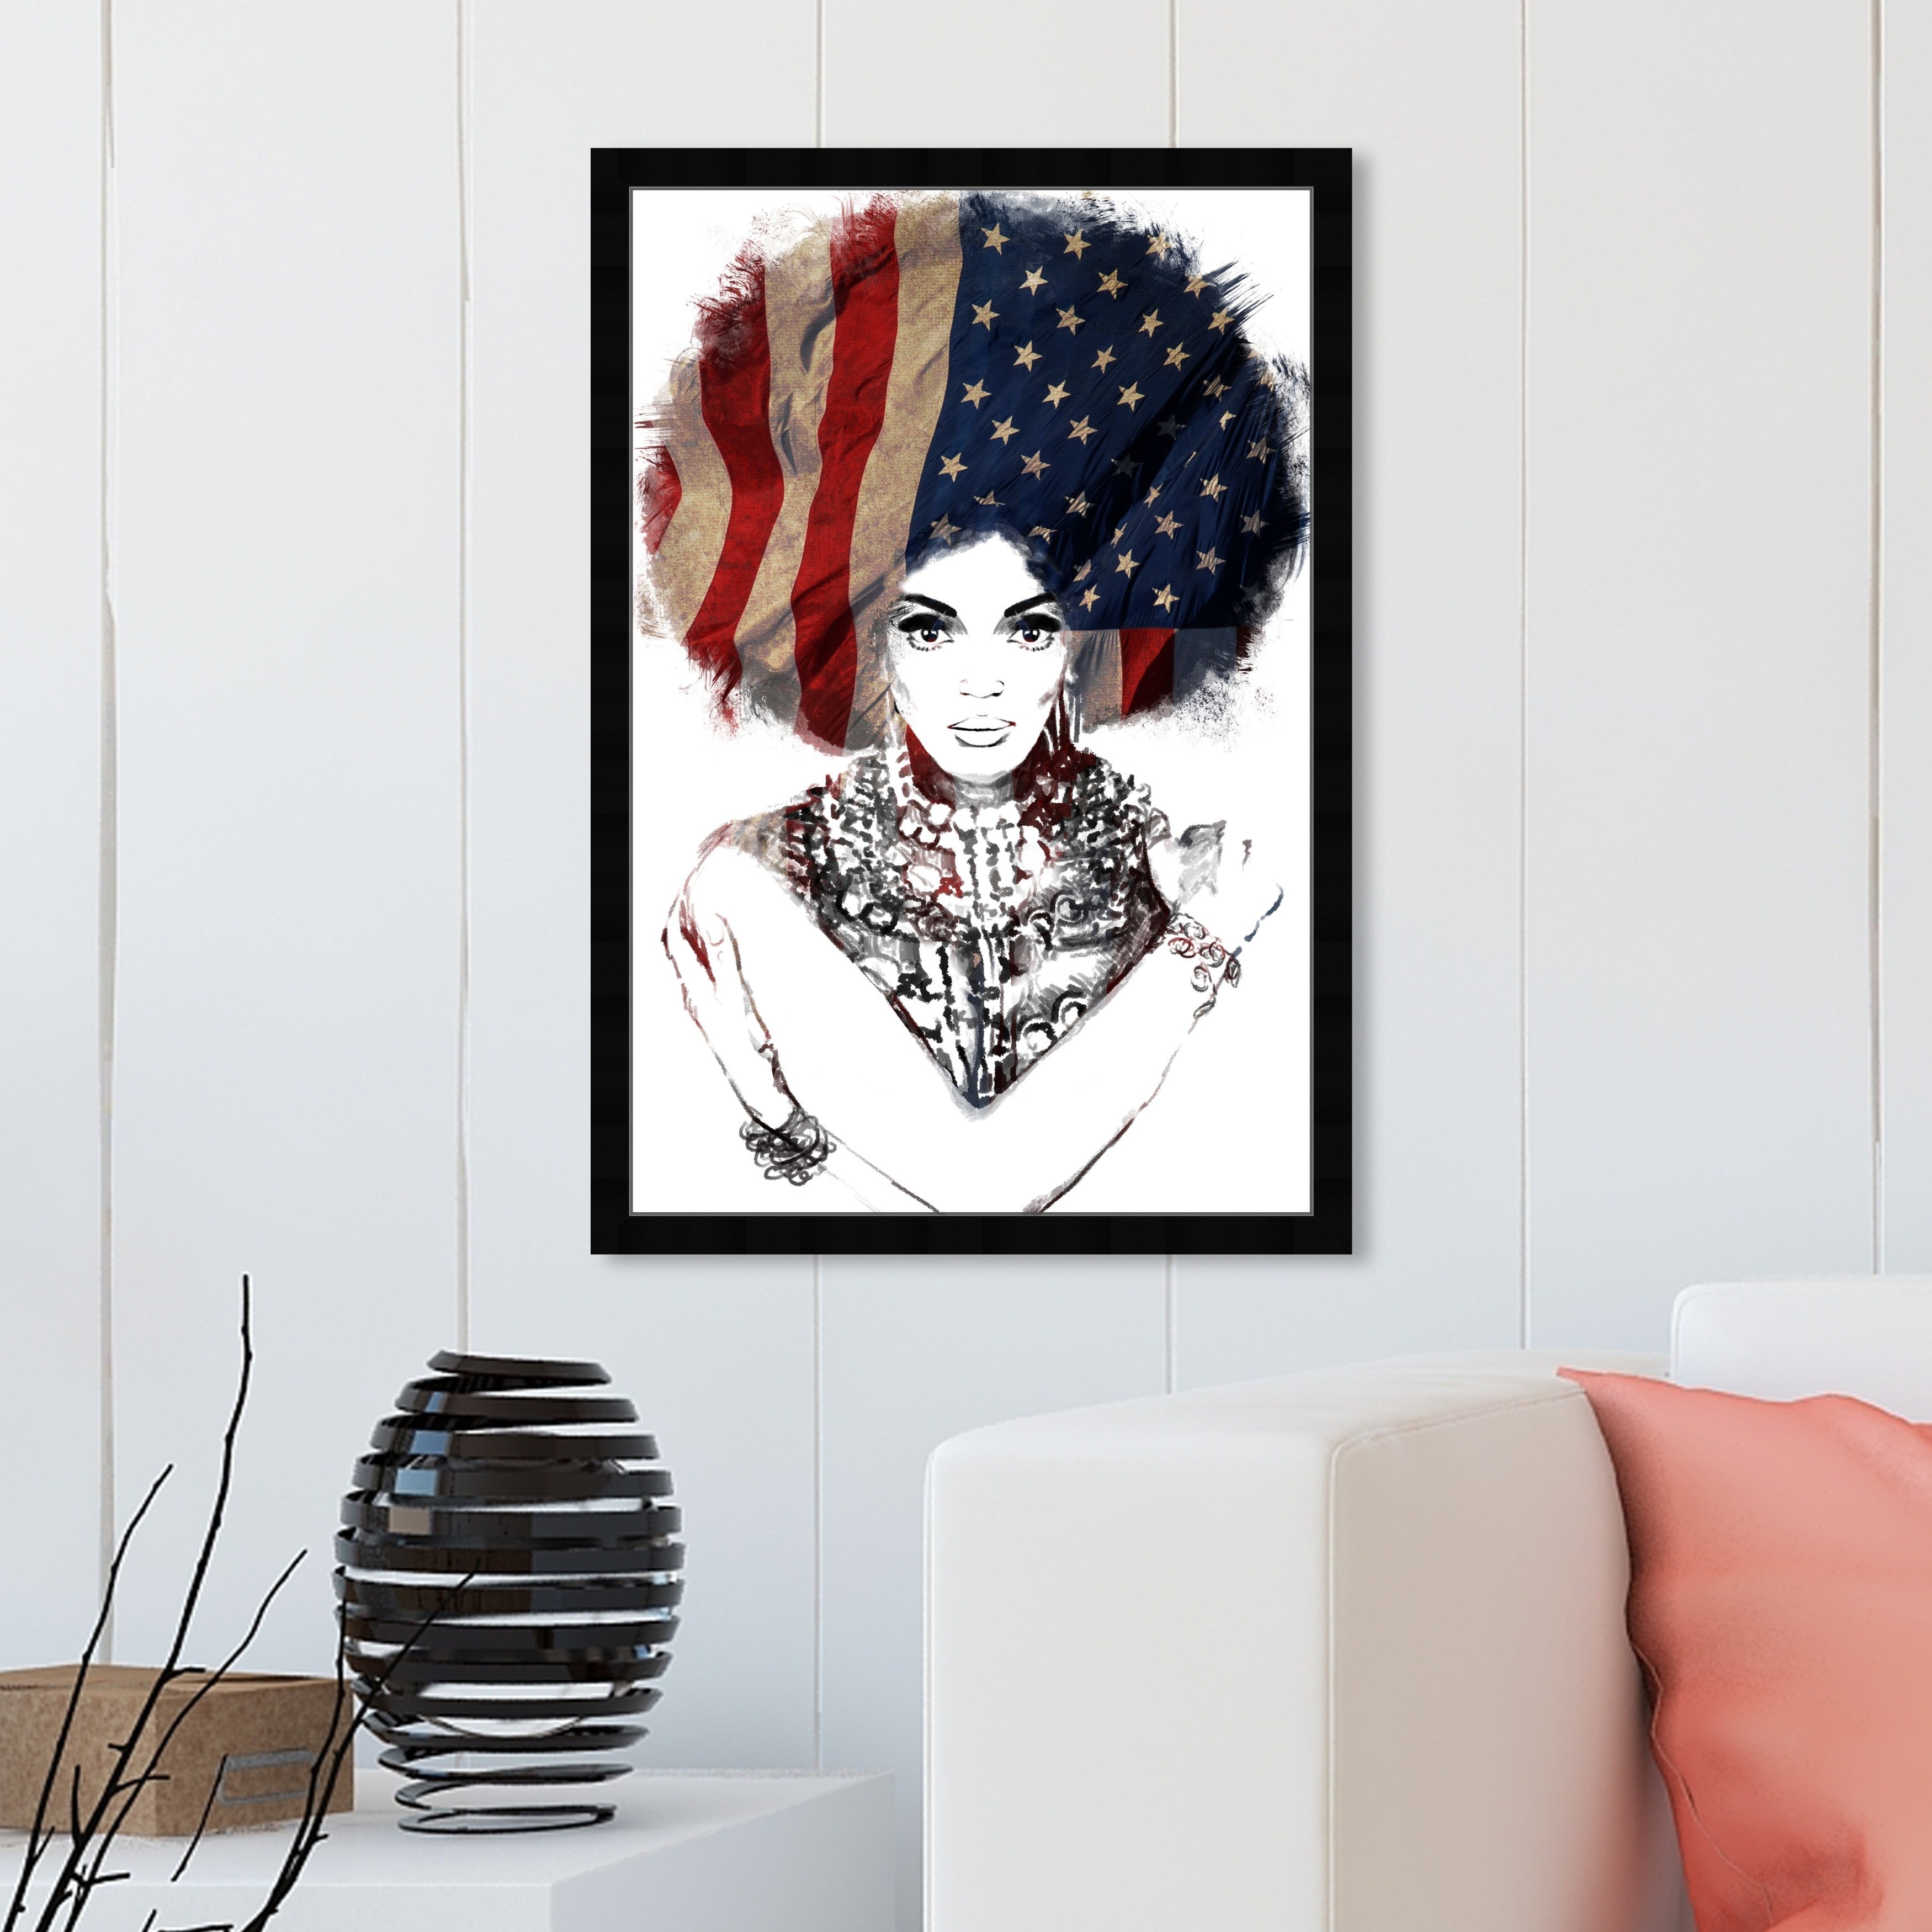 Oliver Gal 'New American Woman' People and Portraits Framed Wall Art Prints Portraits - White, Black